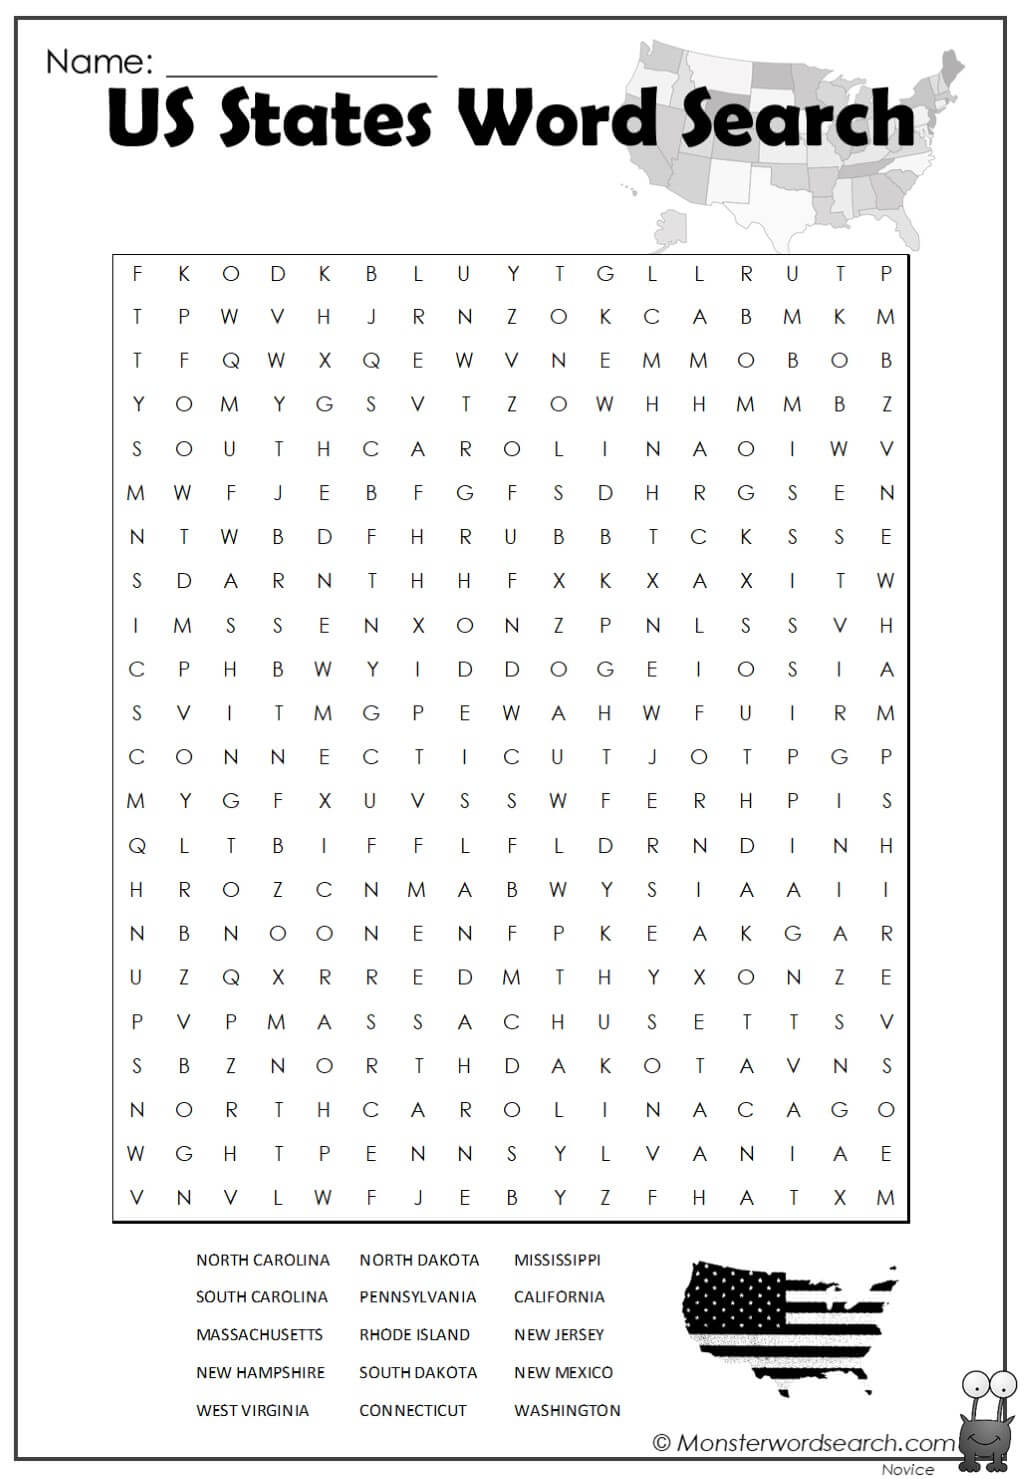 US States Word Search- Monster Word Search